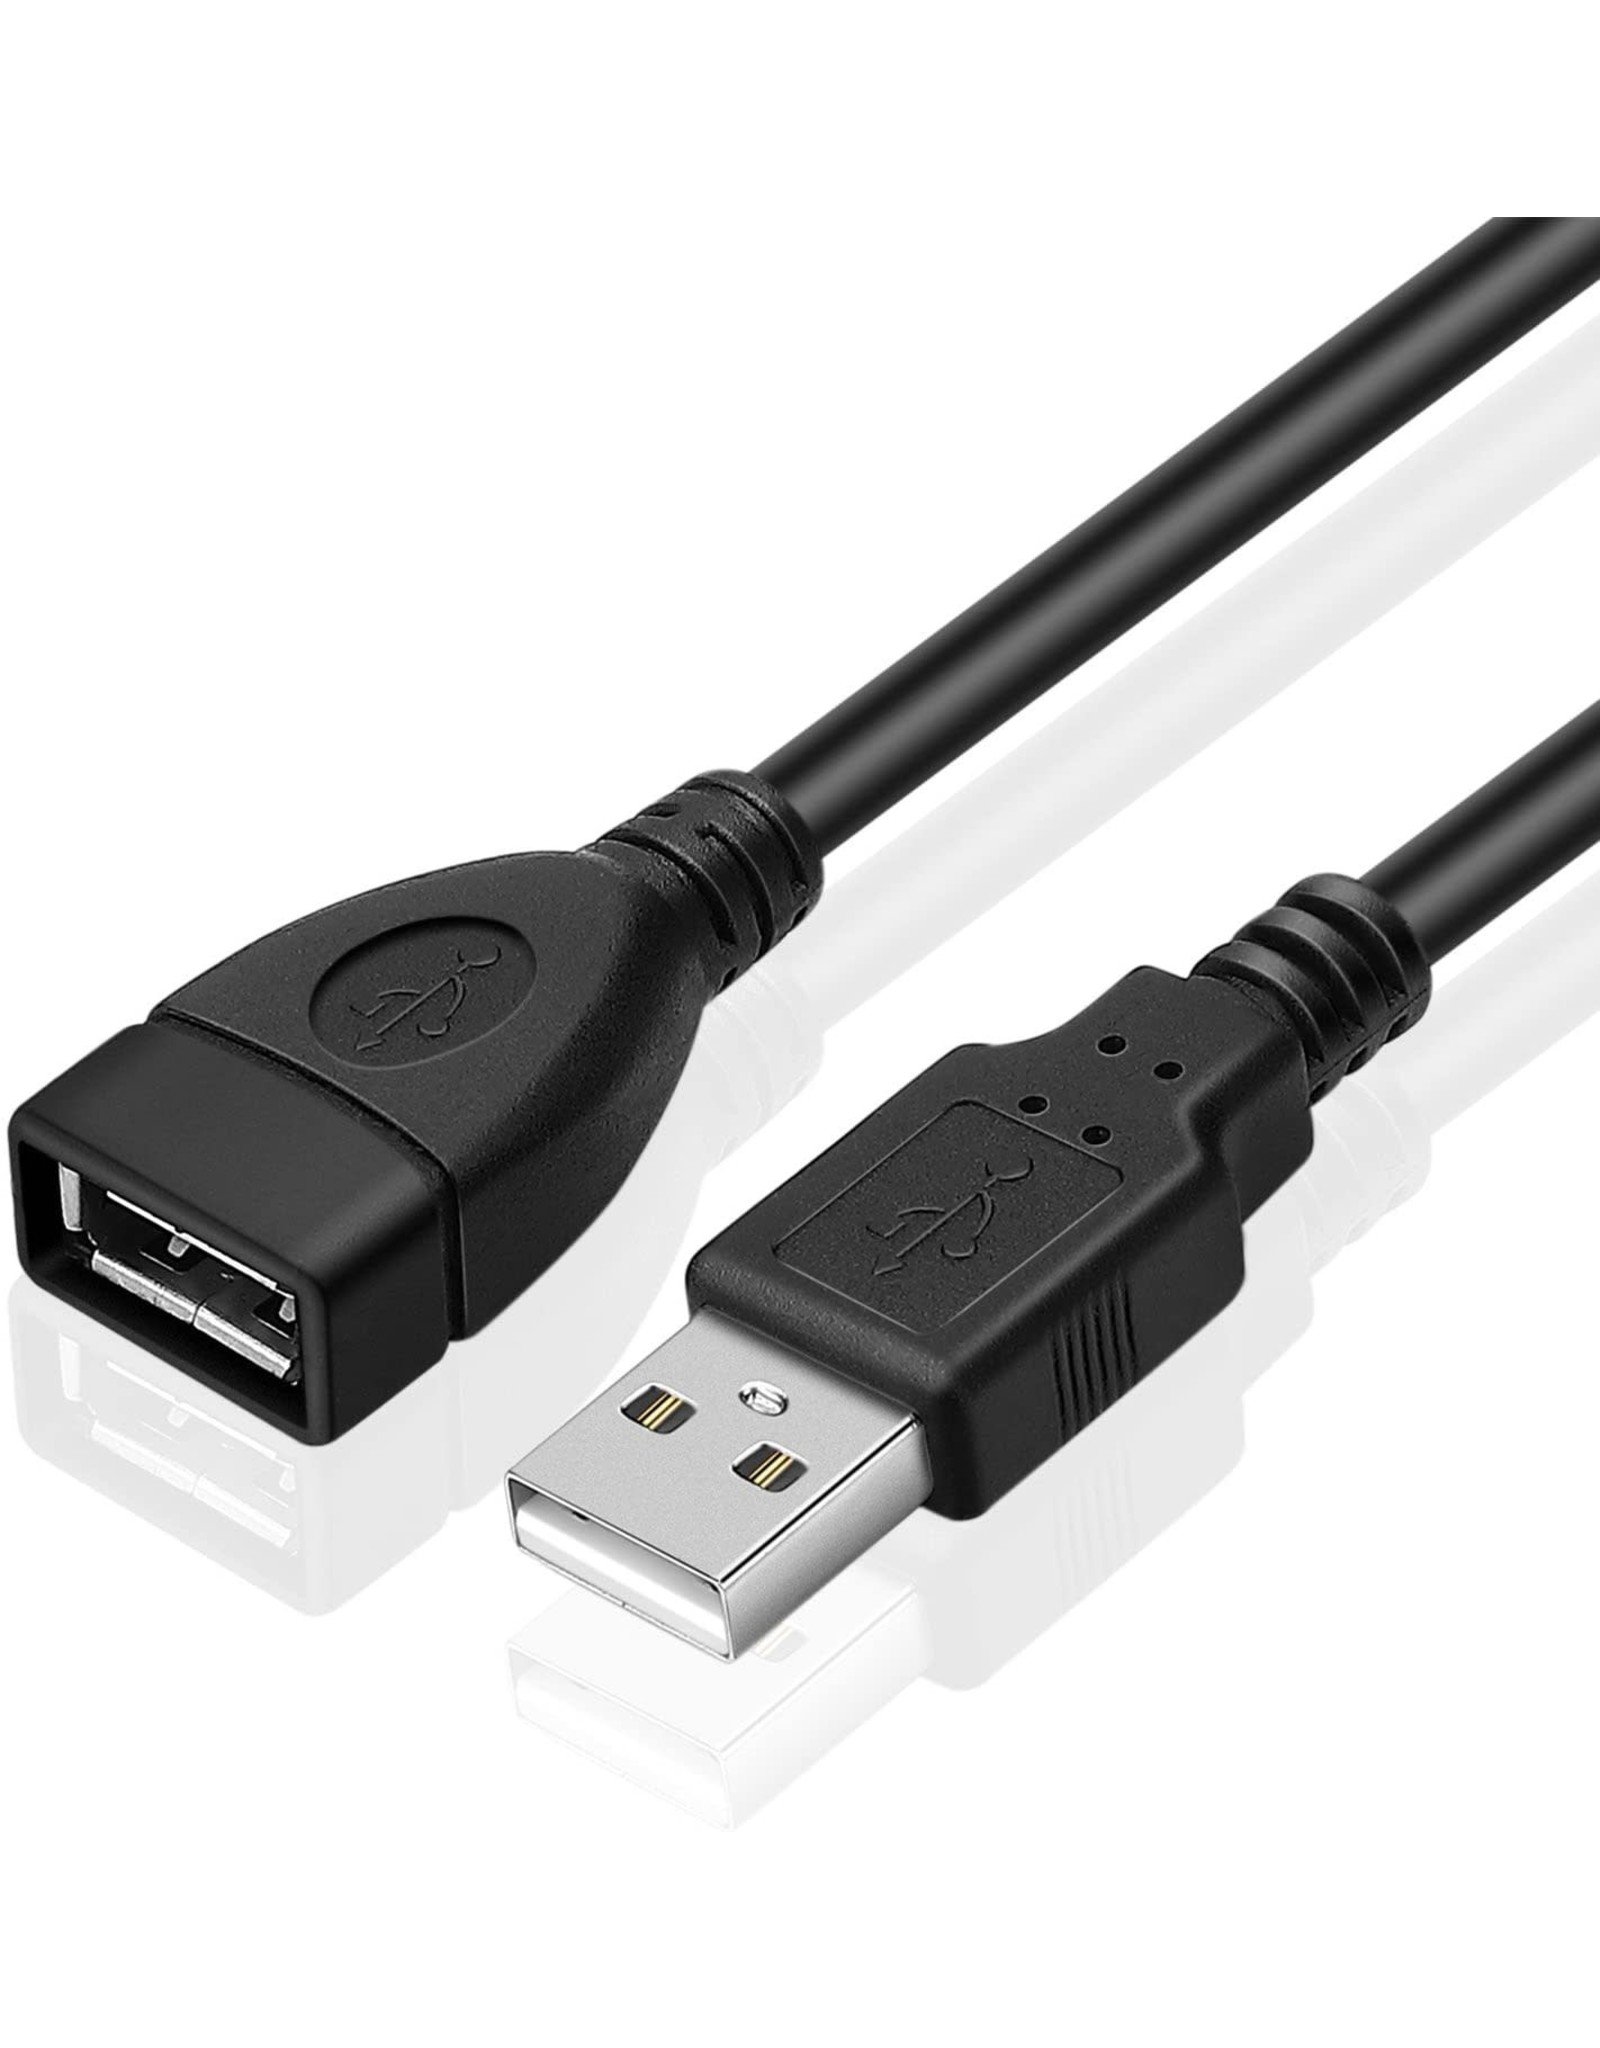 USB Extension Cable 5.5 ft